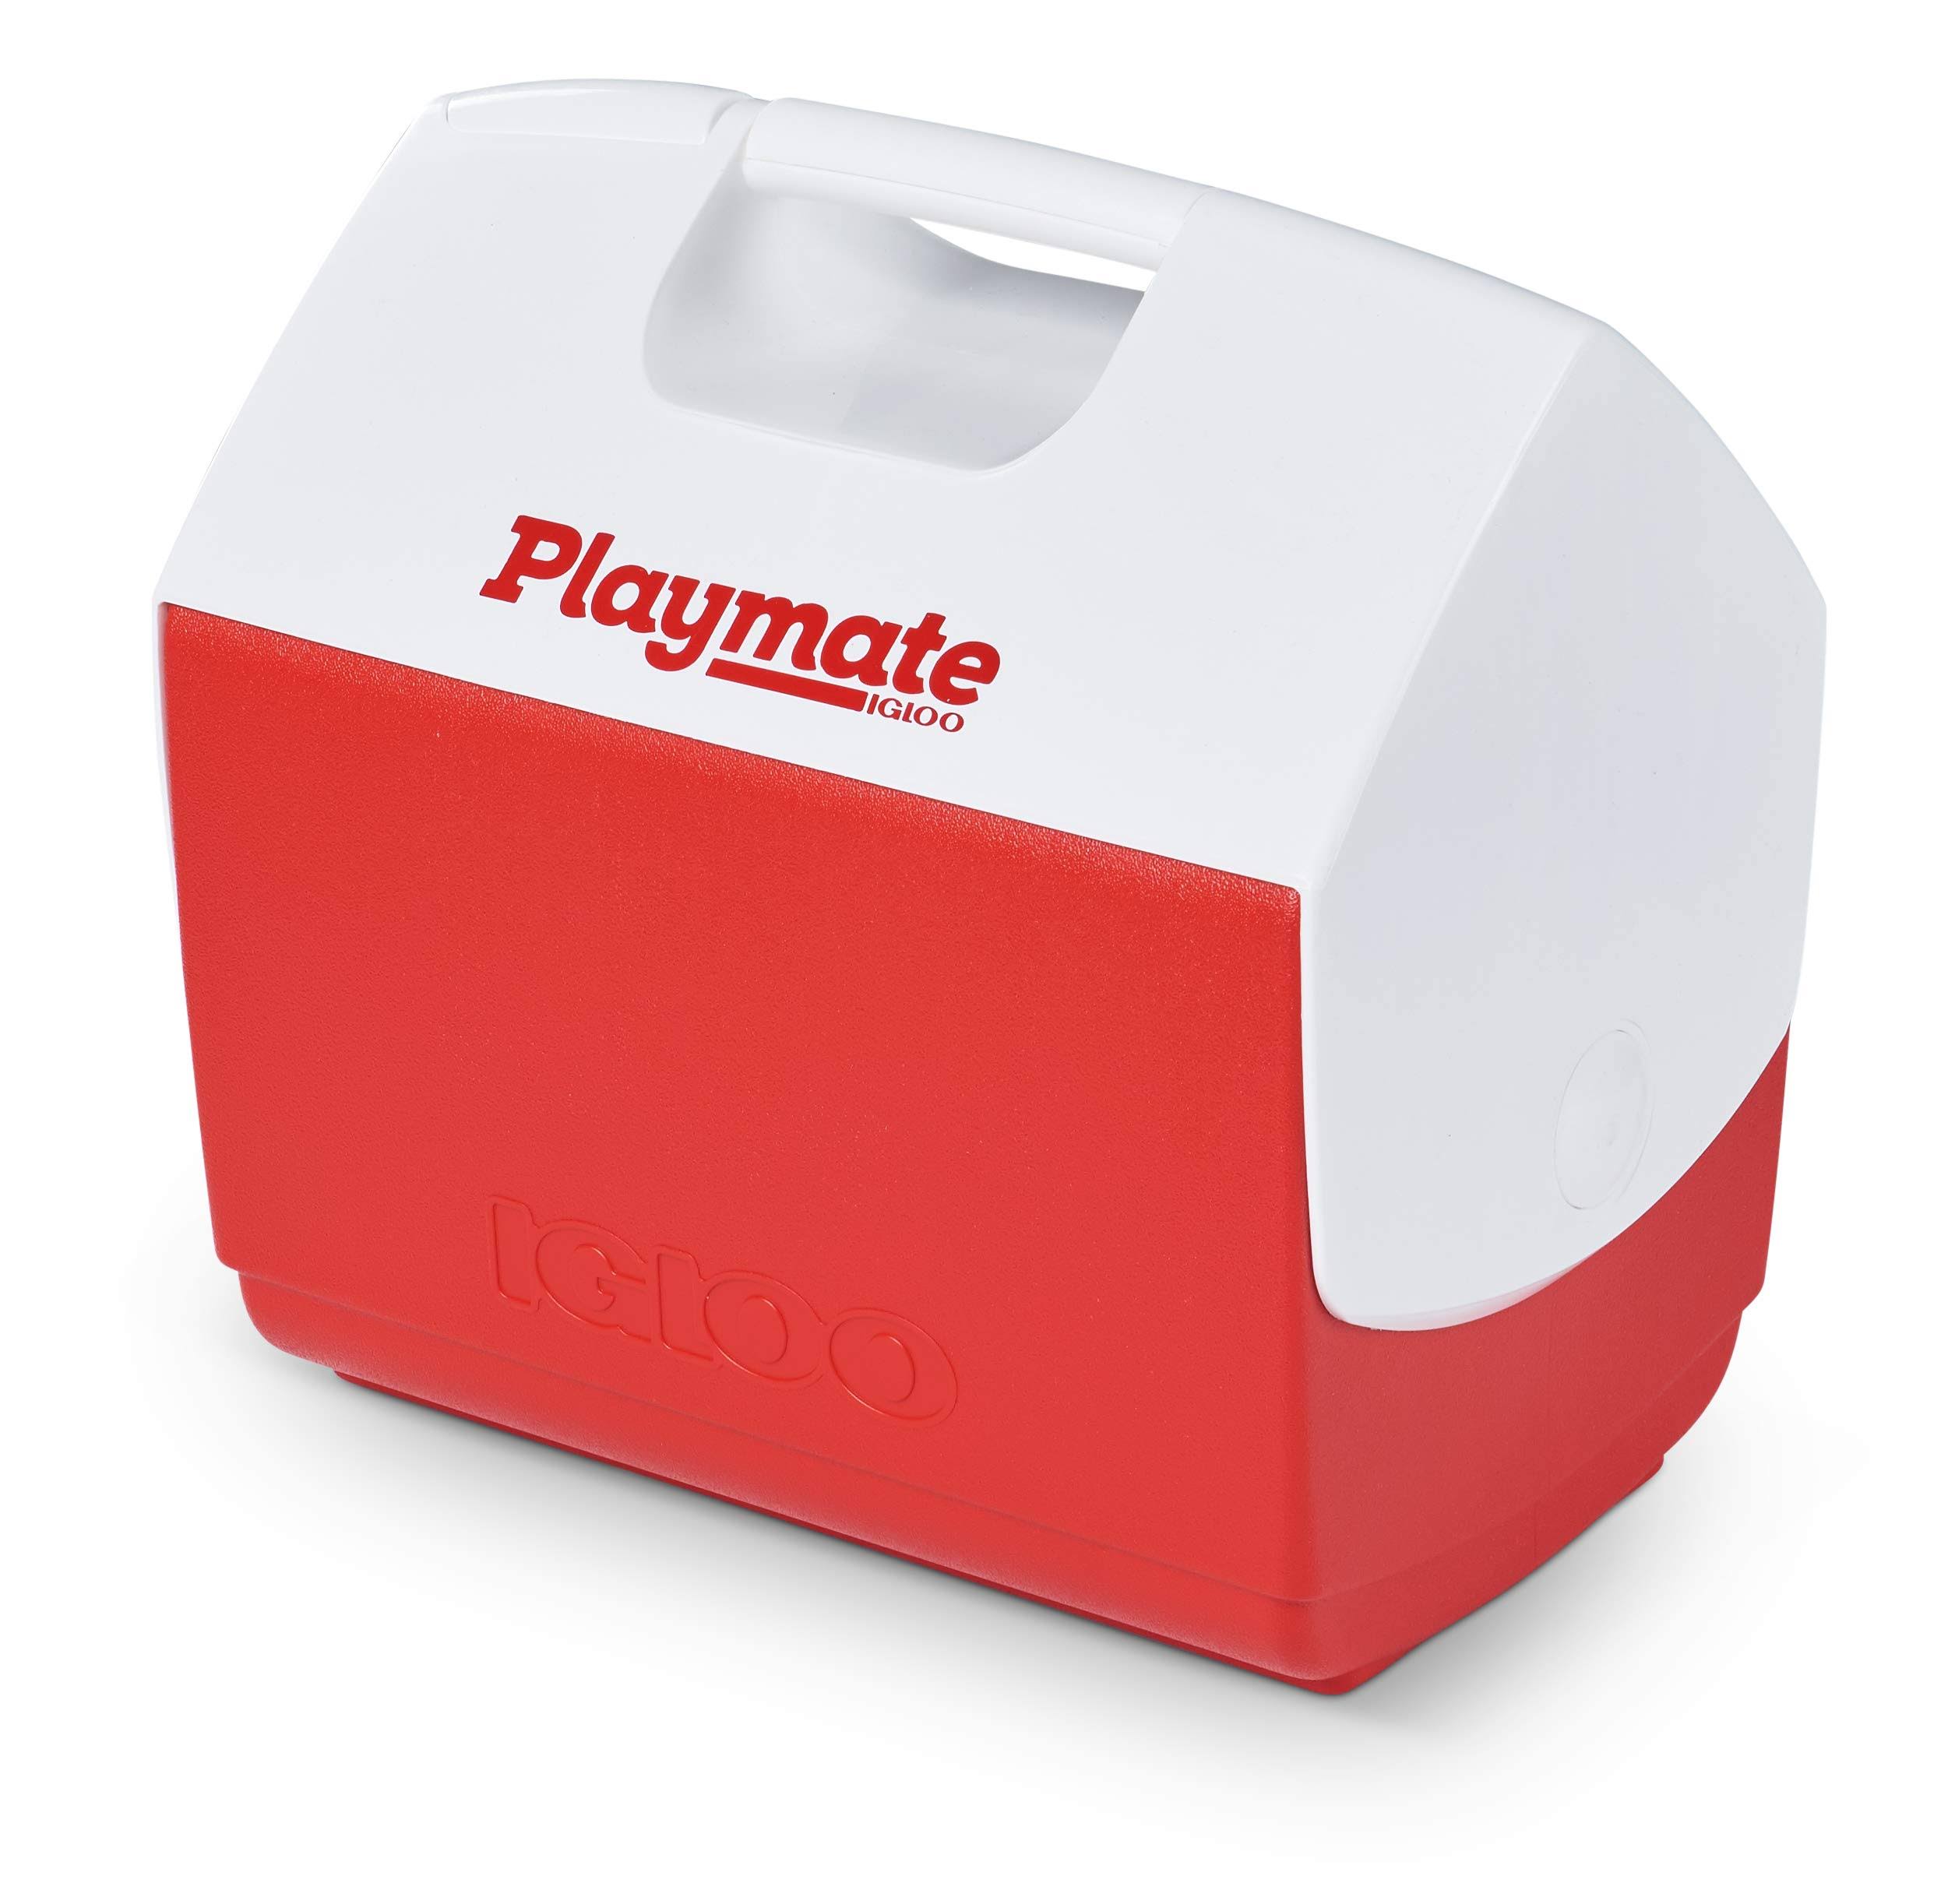 Igloo Playmate Elite Cooler - Red, White